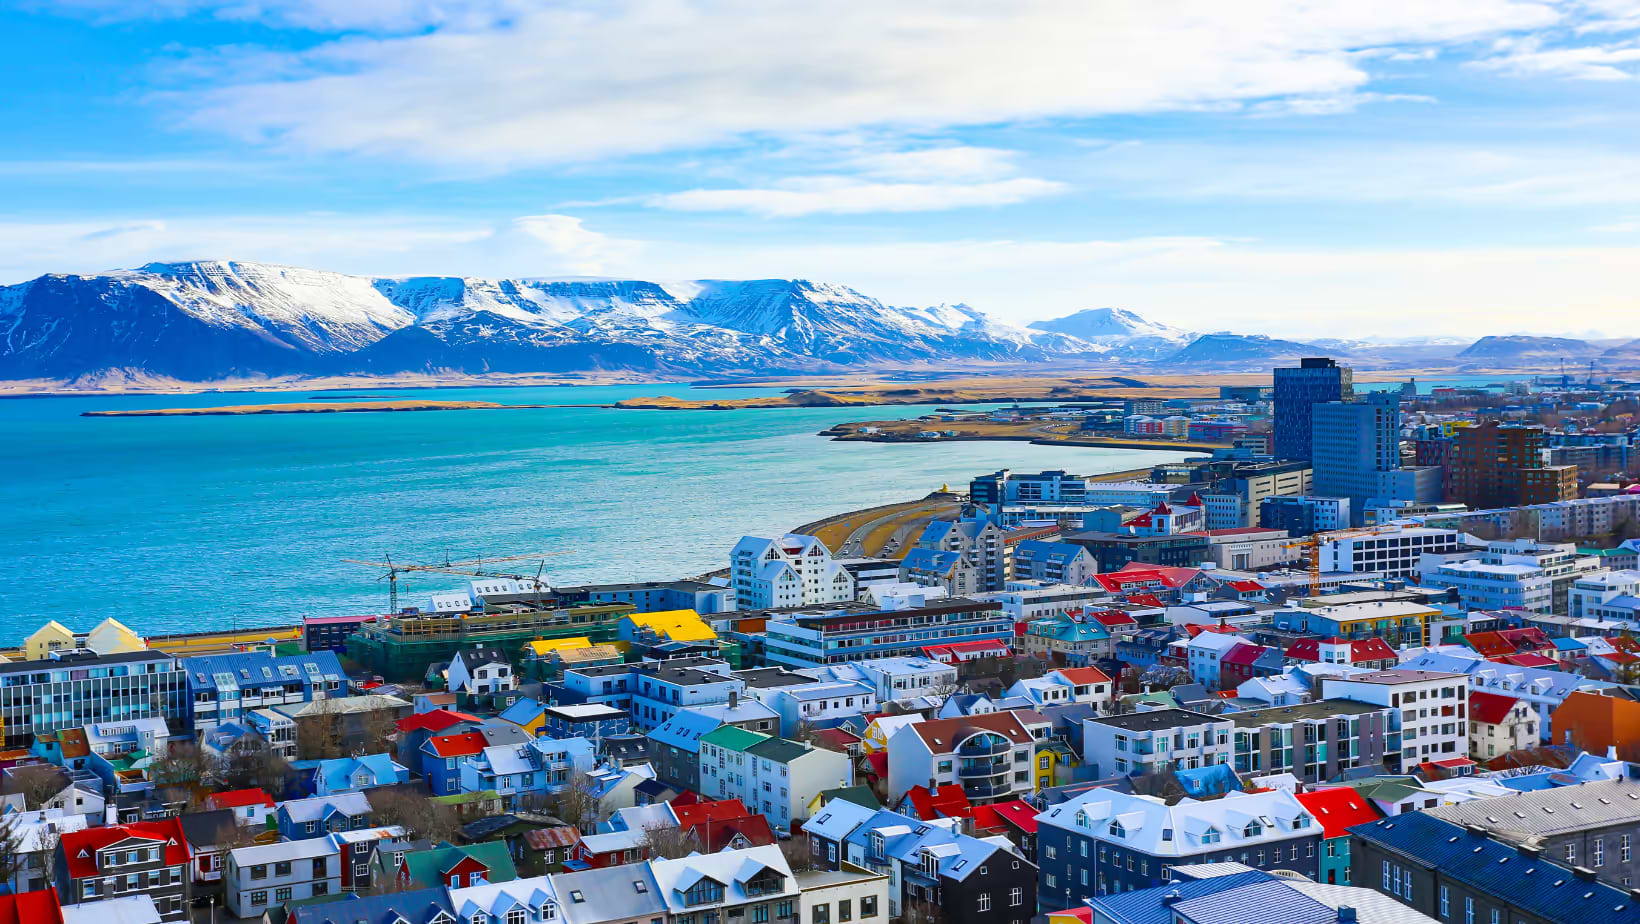 How much does a trip to Iceland cost?